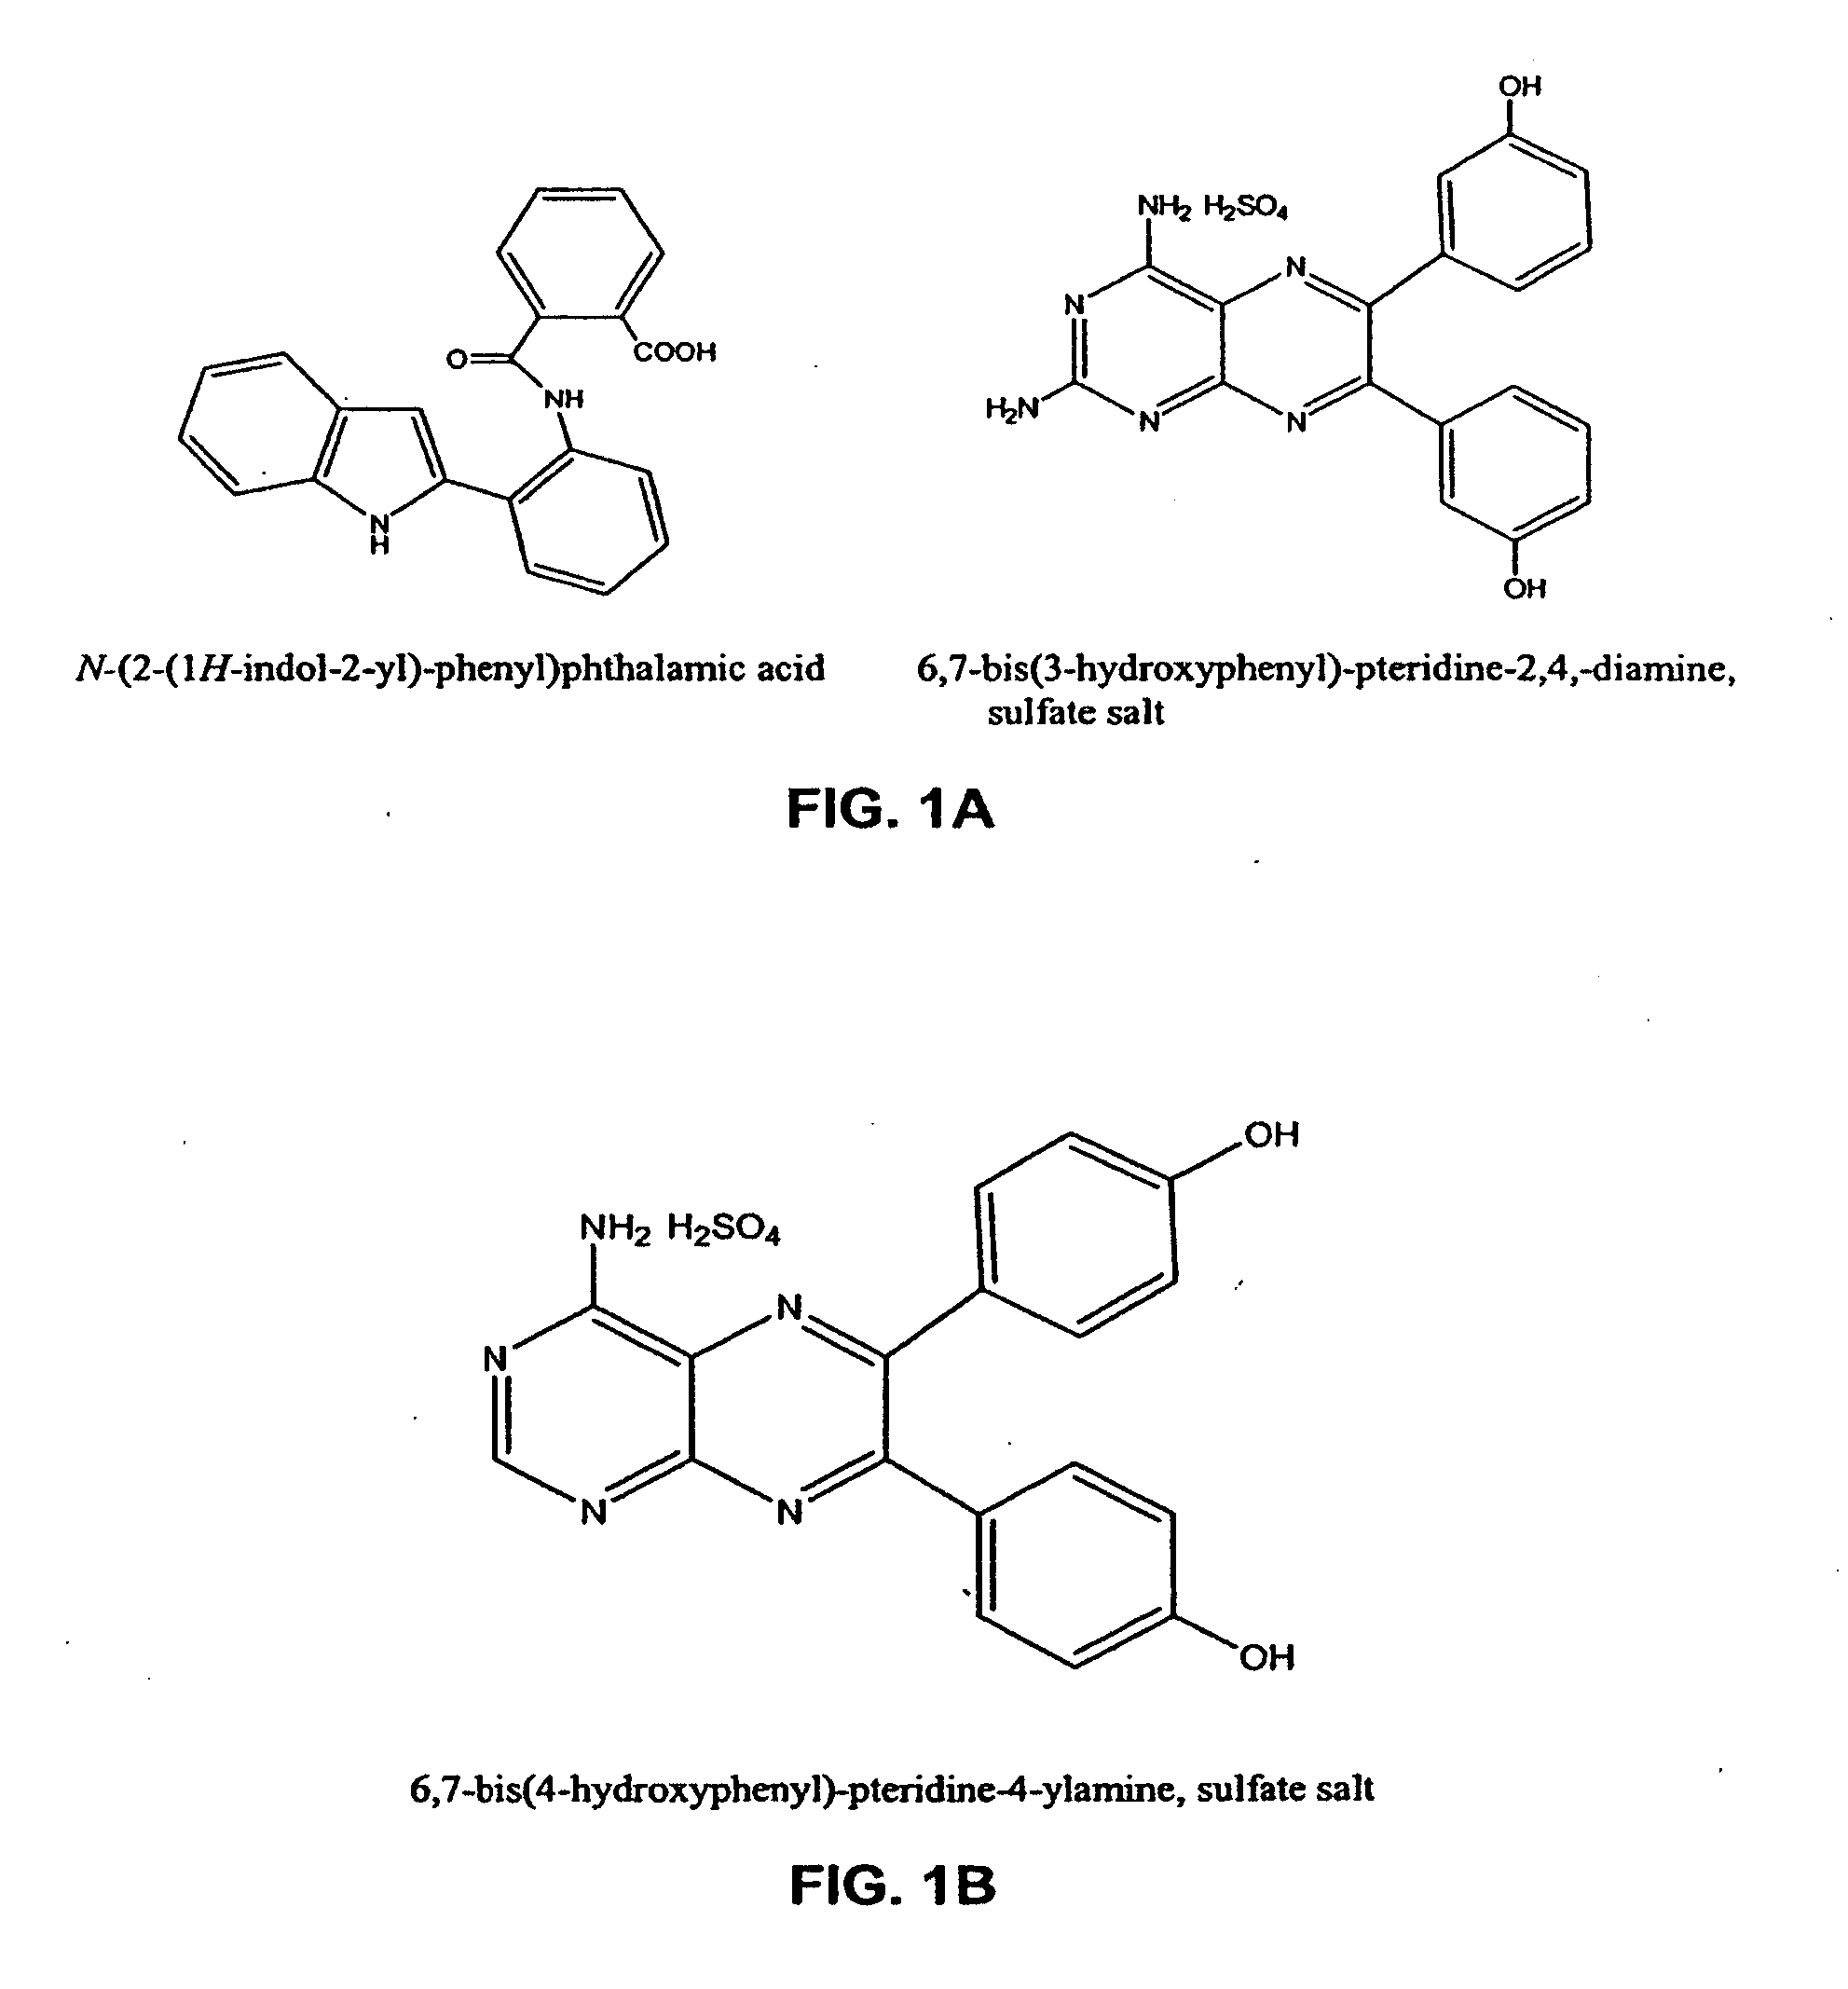 Vasculostatic Agents and Methods of Use Thereof